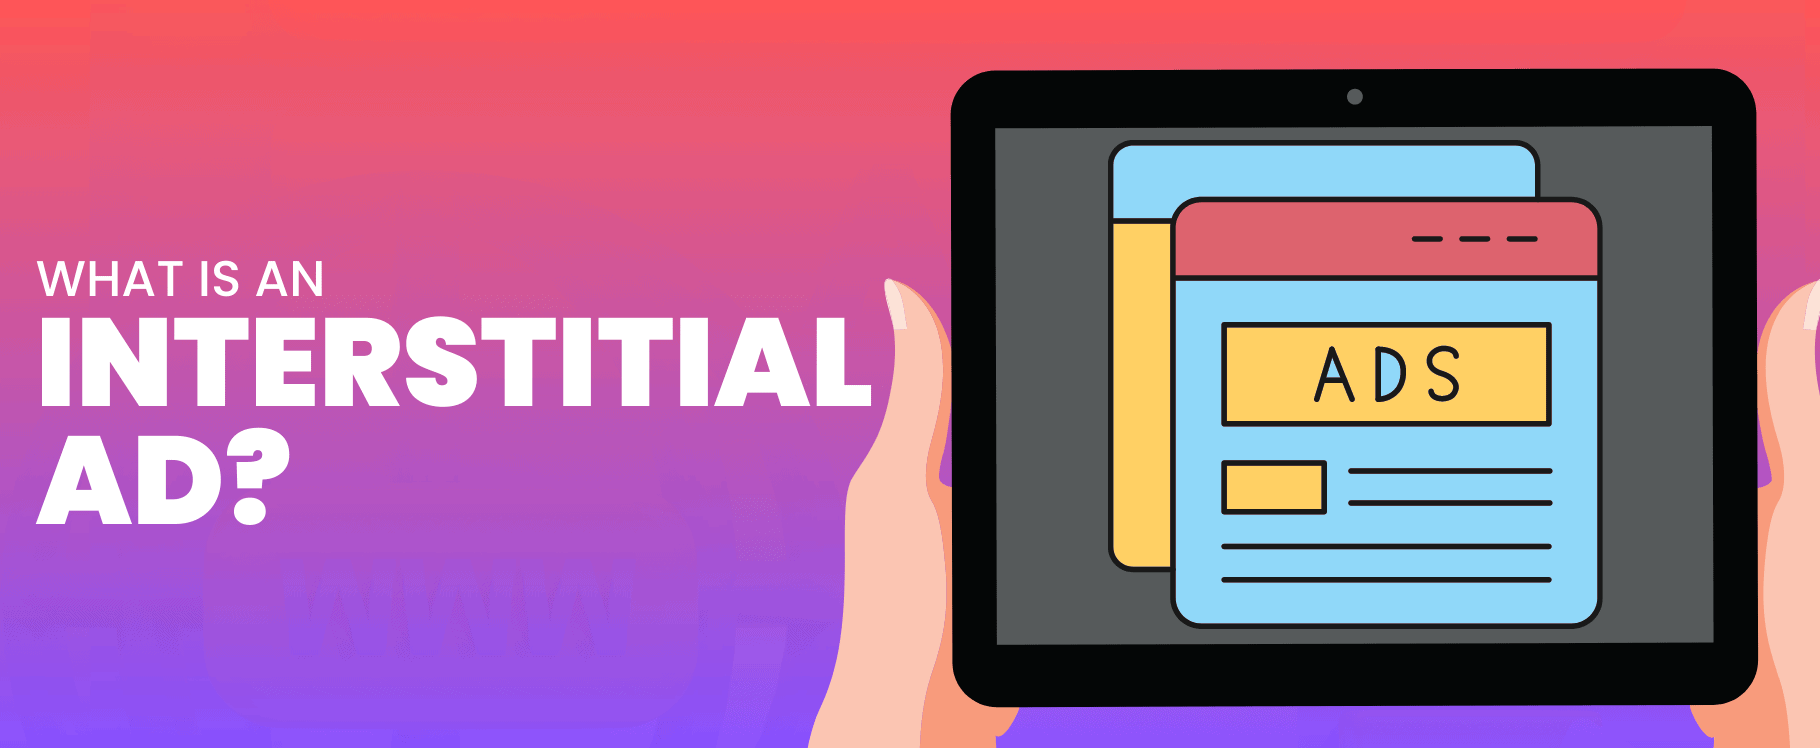 what is an interstitial ad